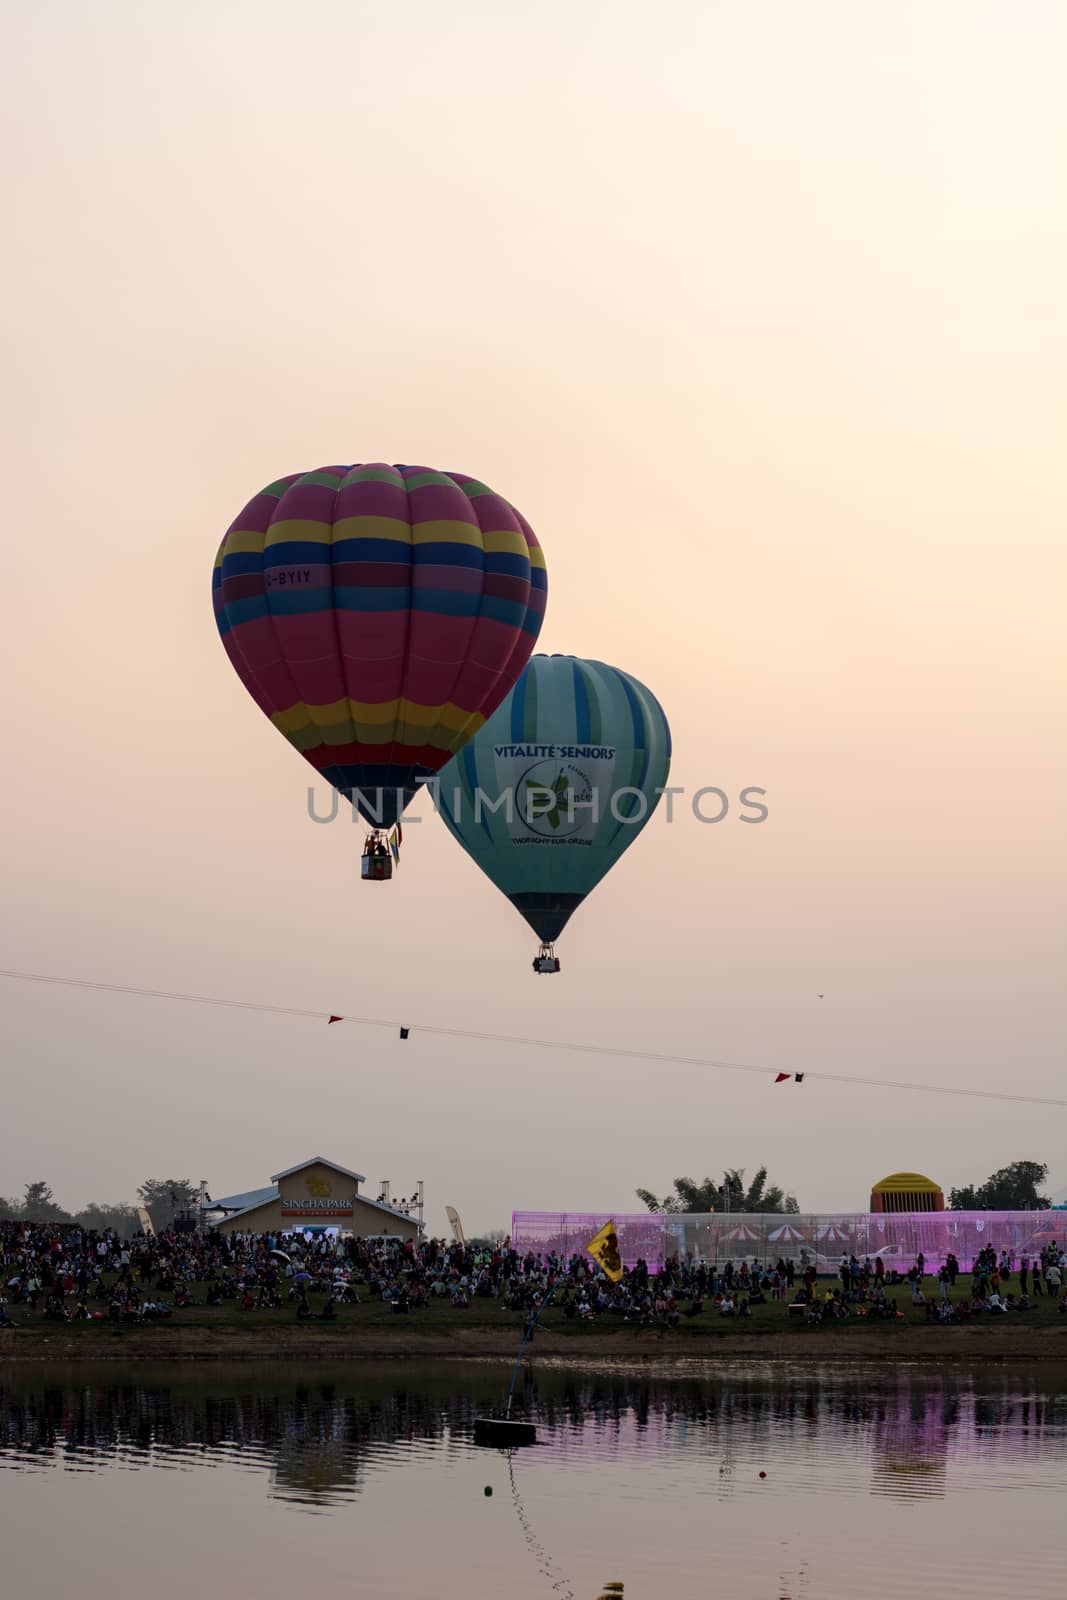 CHIANGRAI, THAILAND - FEBRUARY 14, 2016 : Hot air Balloons ready to rise into the sky in the evening at SINGHA PARK CHIANGRAI BALLOON FIESTA 2016, Chiangrai province, Thailand